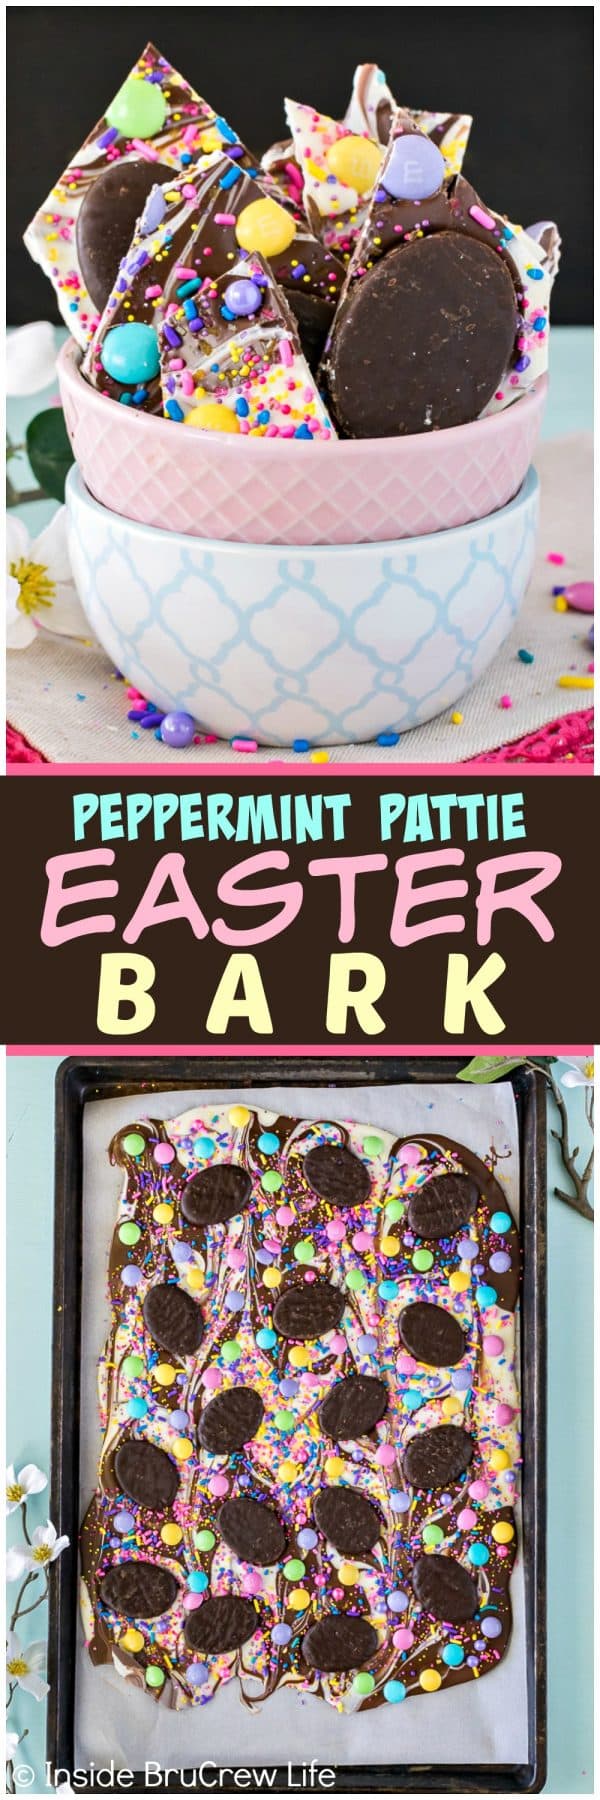 Peppermint Pattie Easter Bark - swirls of chocolate loaded with sprinkles and candy makes an easy no bake treat. Great dessert recipe for Easter parties!